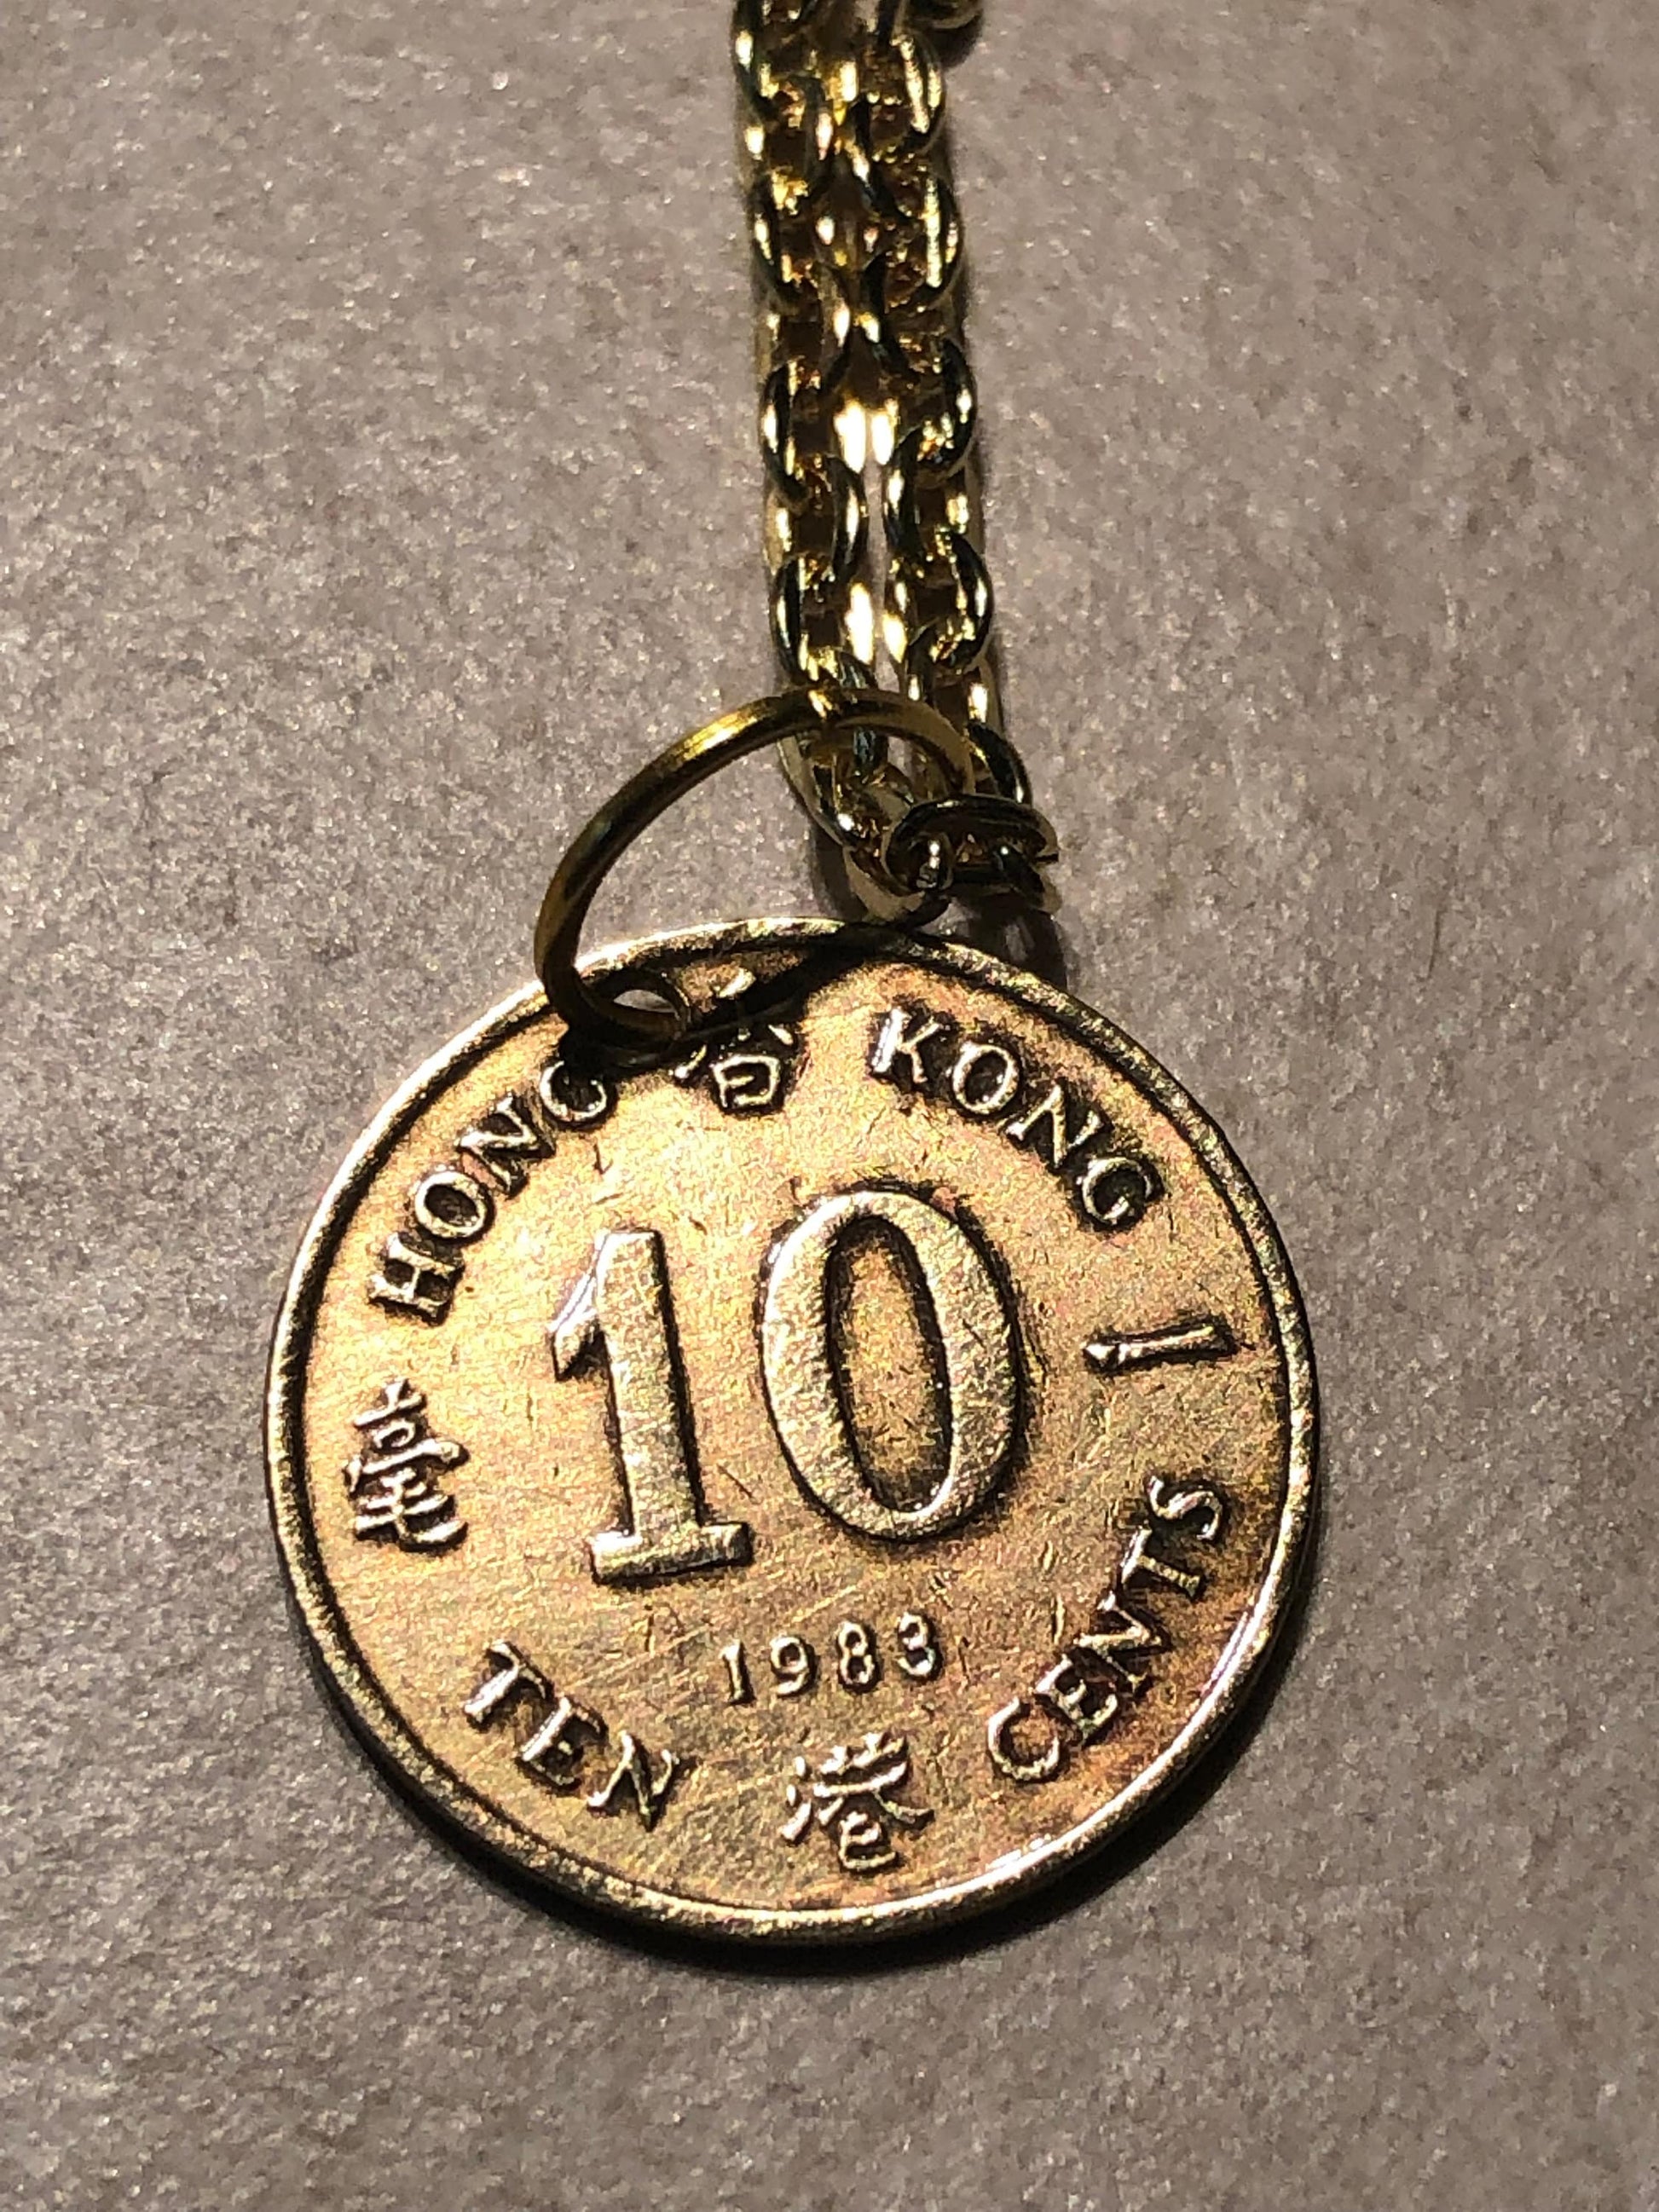 Hong Kong Coin Necklace 10 Cents Pendant China Vintage Rare Coins Coin Enthusiast Fashion Accessory Handmade